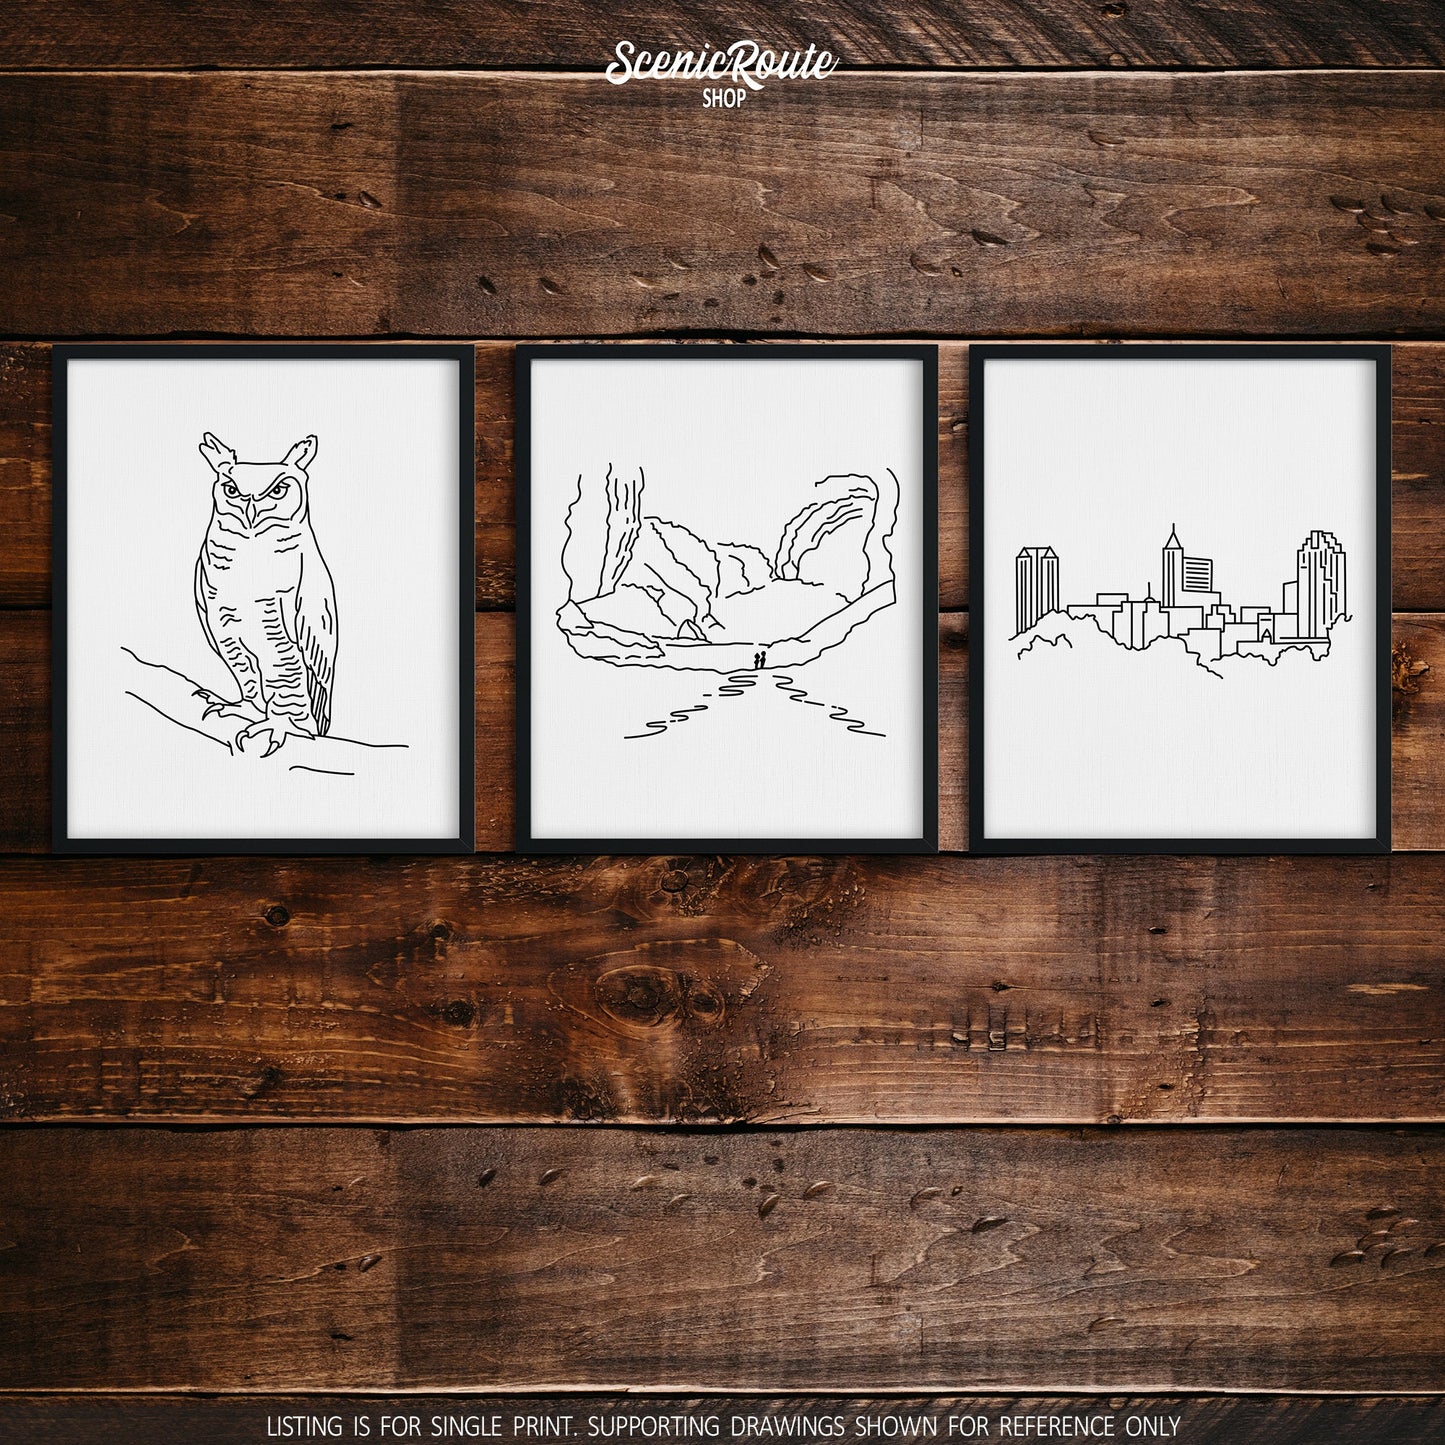 A group of three framed drawings on a wood wall. The line art drawings include an Owl, Wind Cave National Park, and the Raleigh Skyline